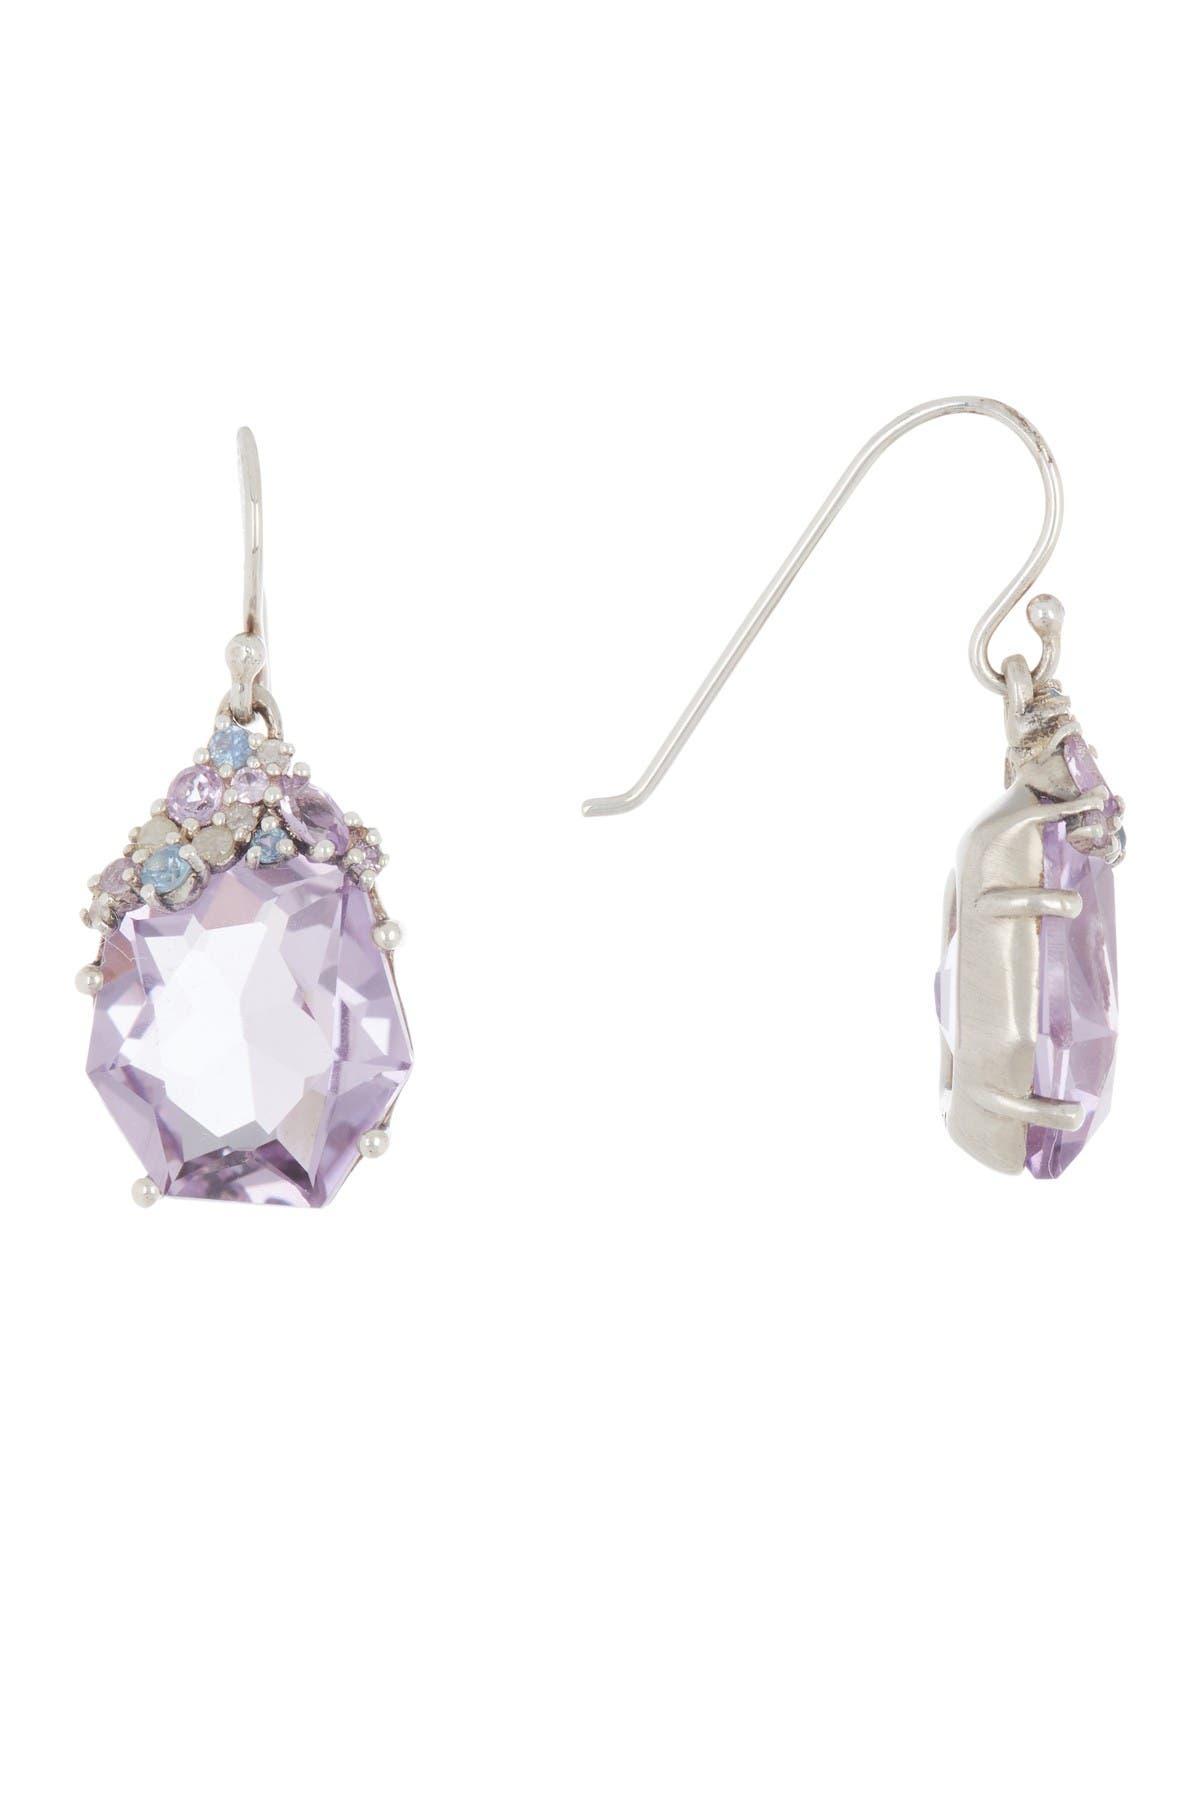 Alexis Bittar Sterling Silver Amethyst With Diamond & Sapphire Cluster Drop Earrings In D0.15 Si2si1 Am Sa Ss